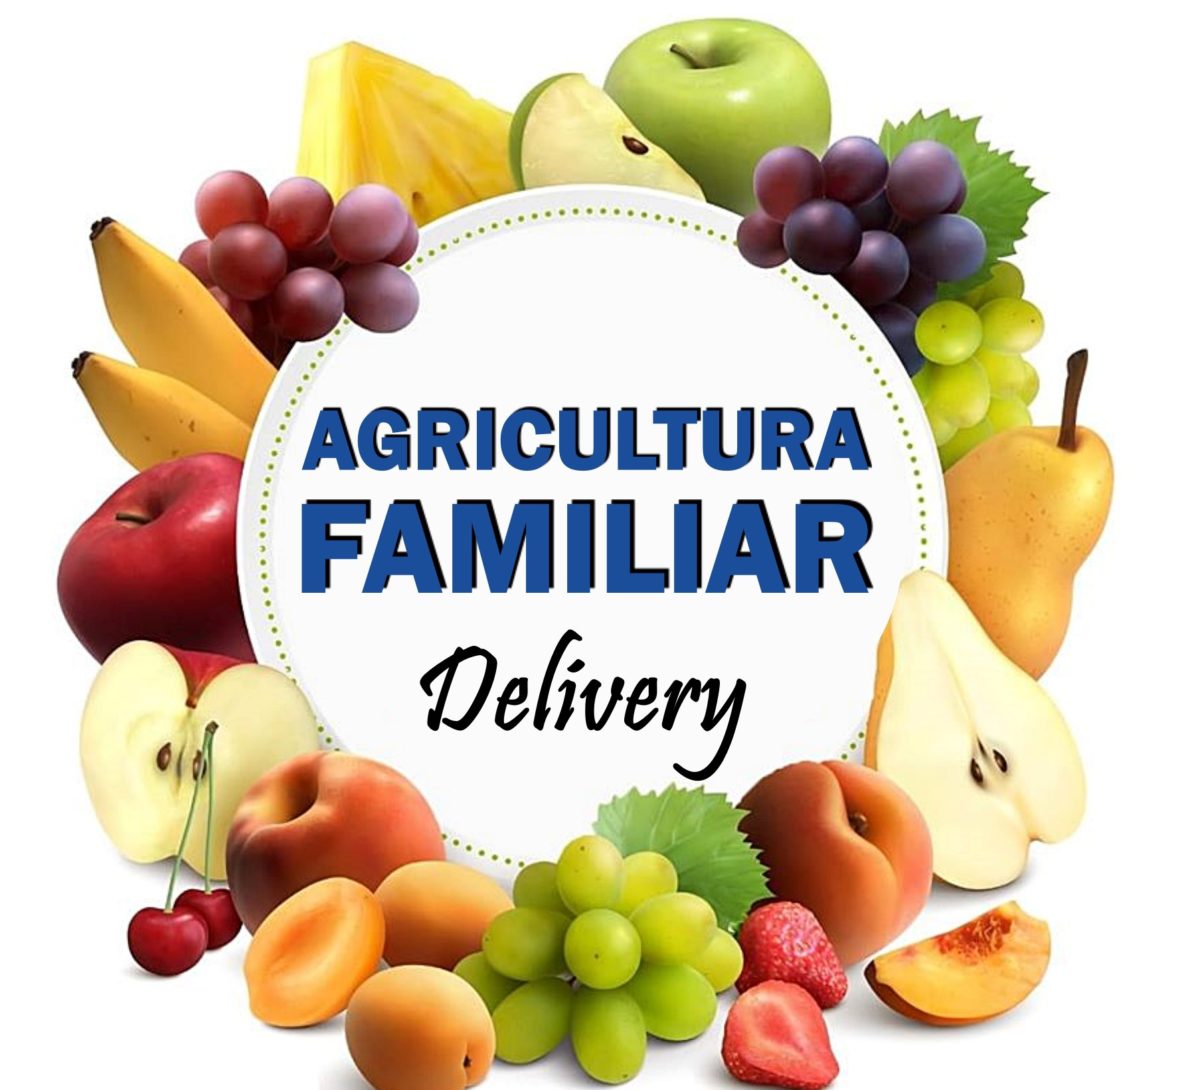 Agricultura Familiar Delivery